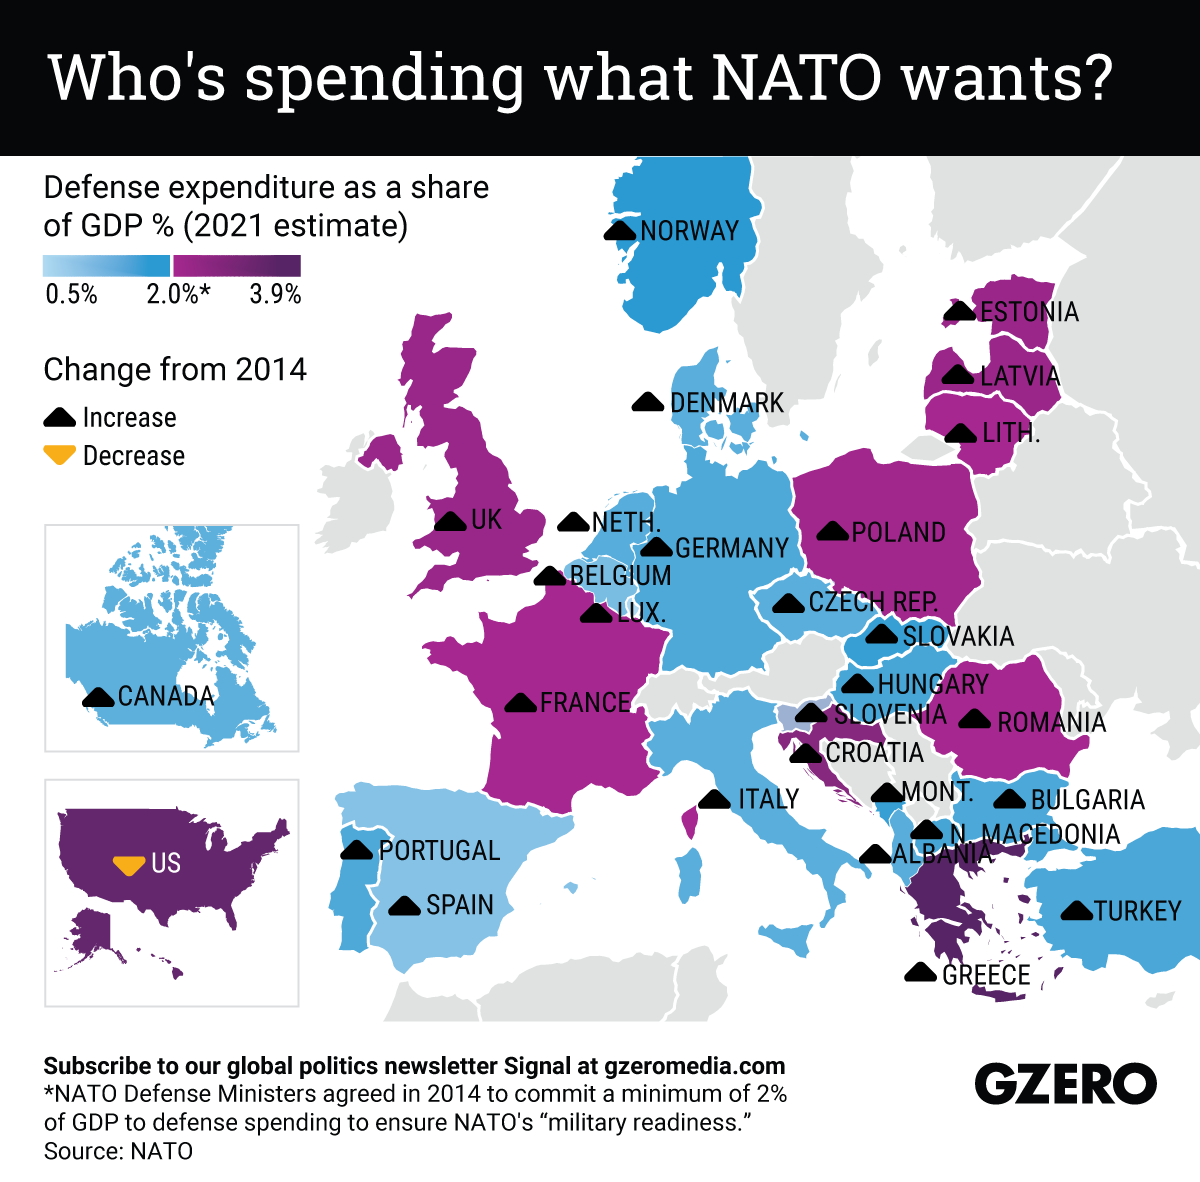 The Graphic Truth: Who's spending what NATO wants?